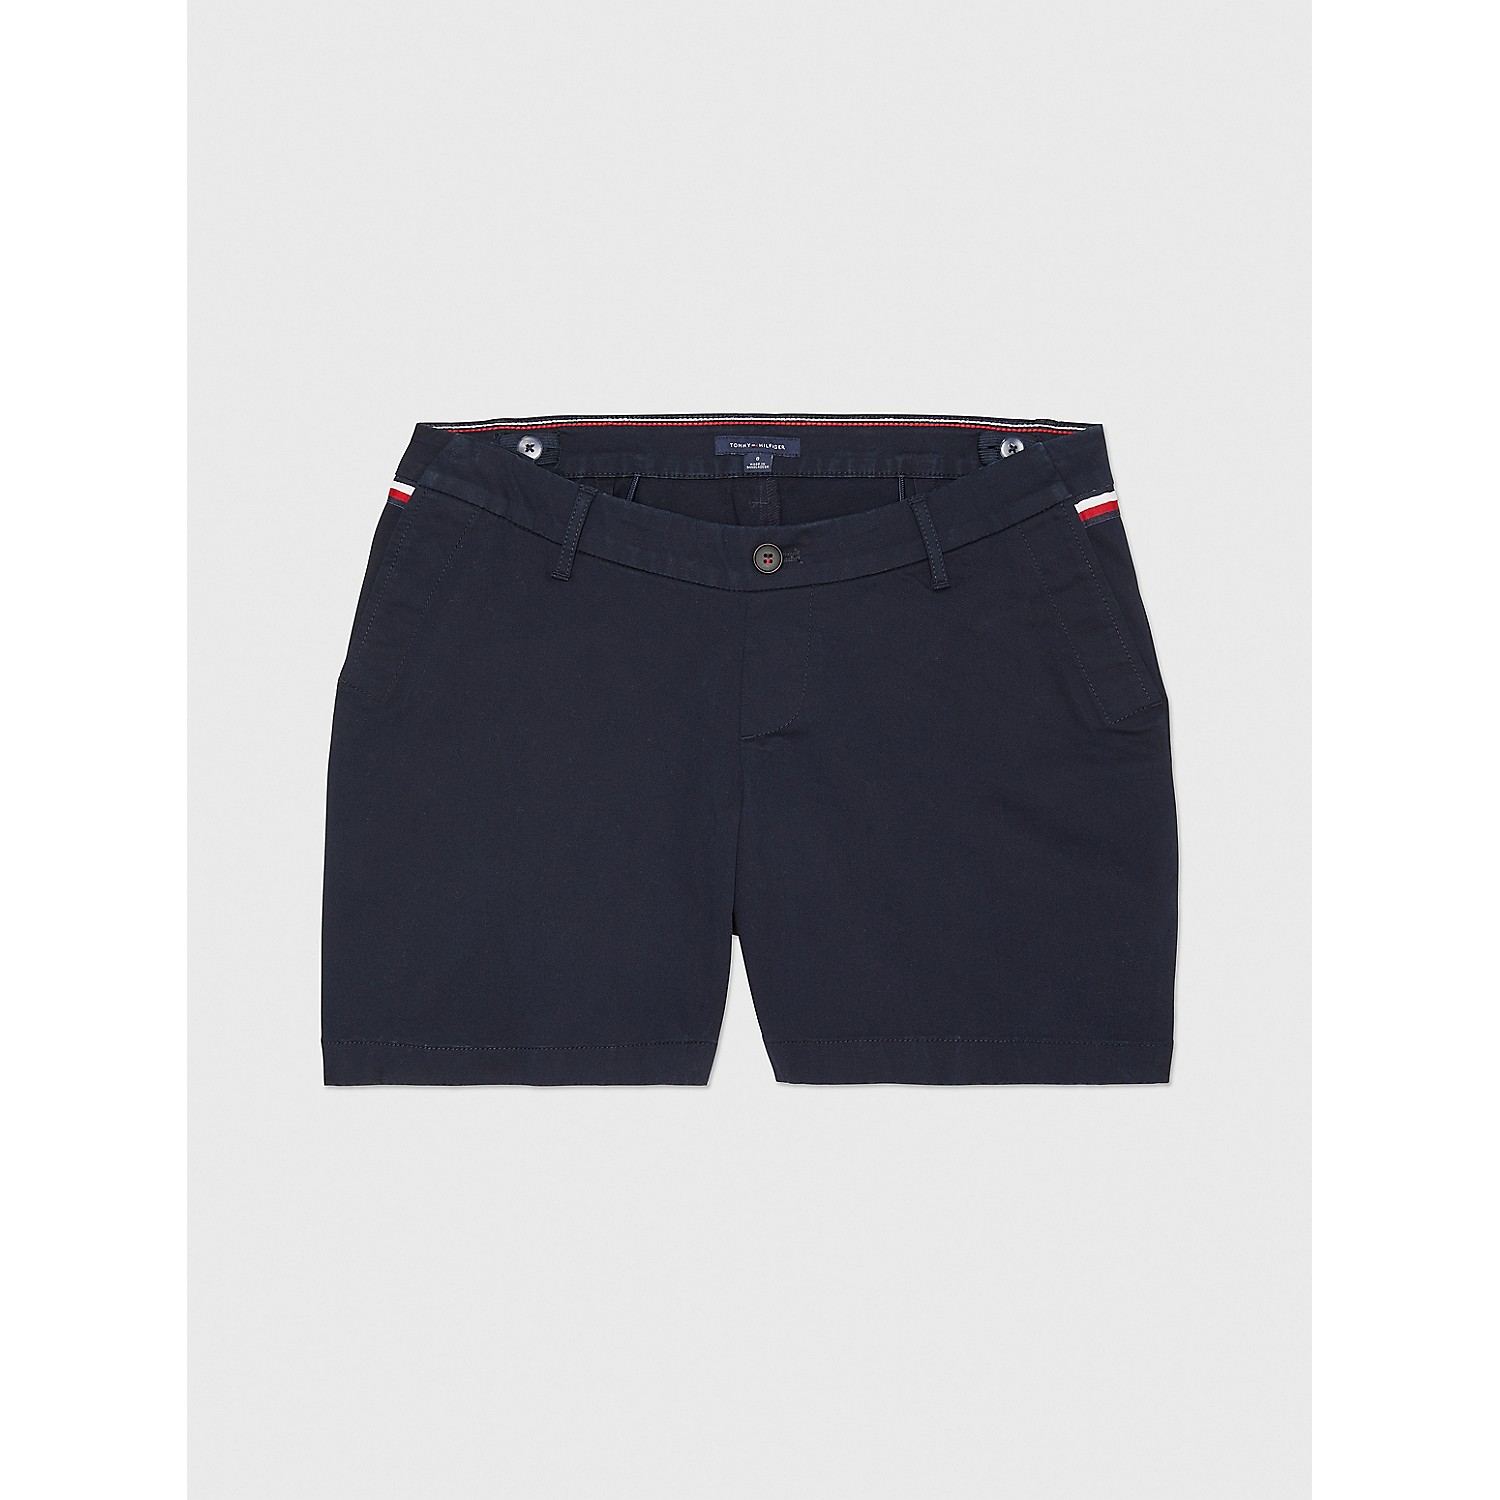 TOMMY HILFIGER Seated Fit Solid Short